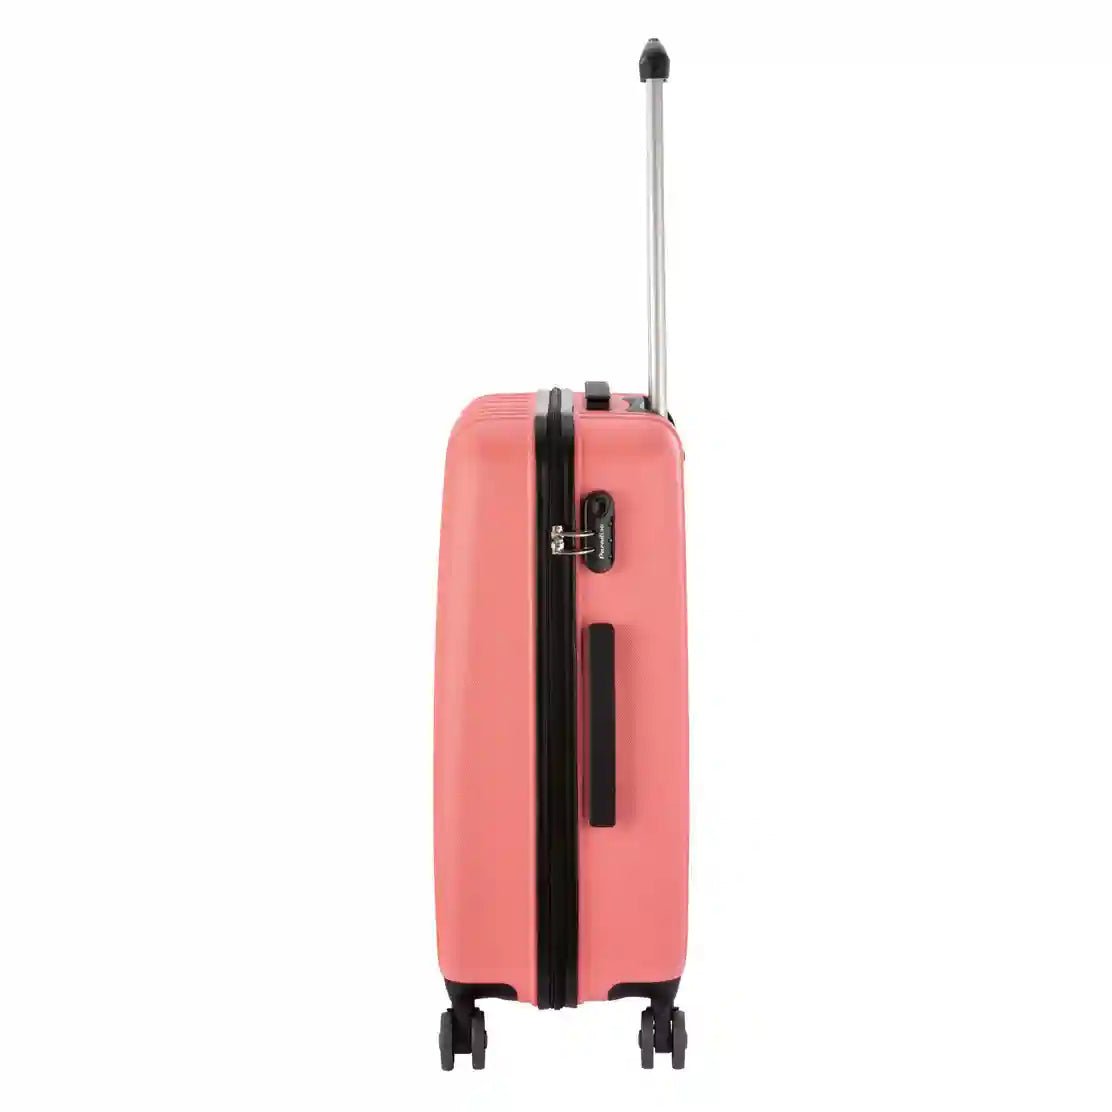 Paradise by Check In  Aurora 4-Rollen Trolley 67 cm - Koralle